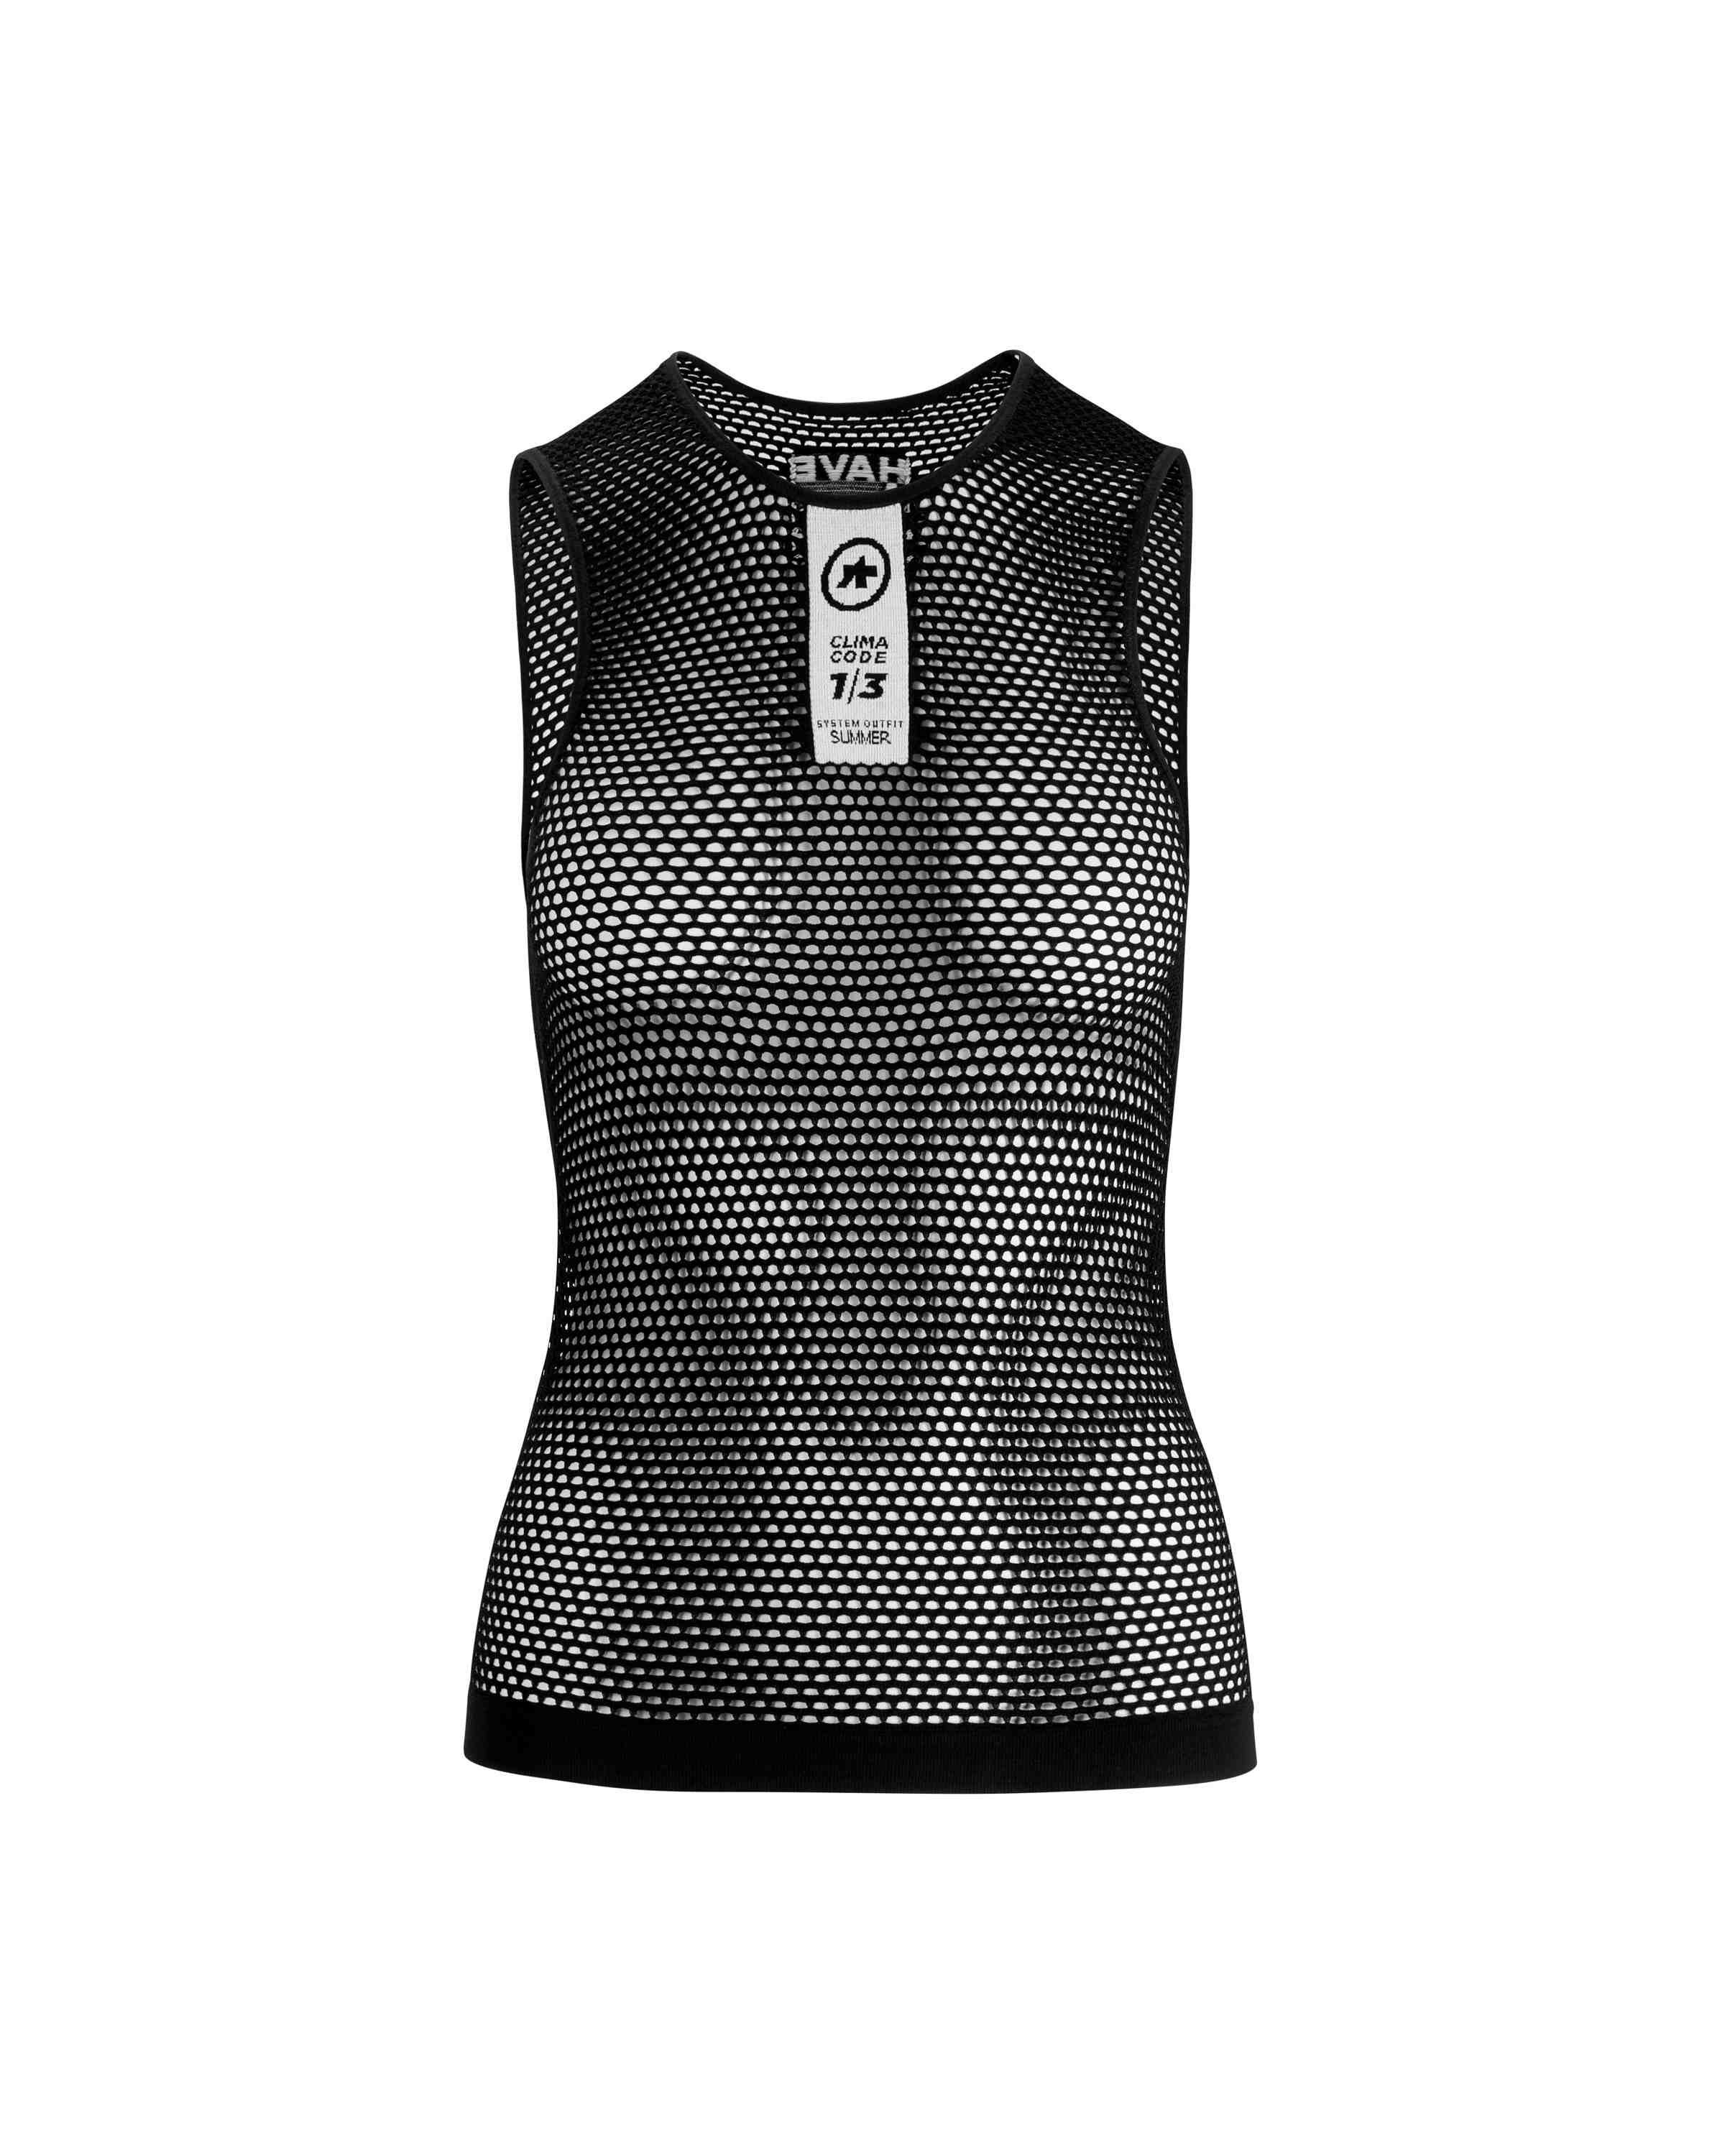 Assos skinfoil summer base layer without sleeves black